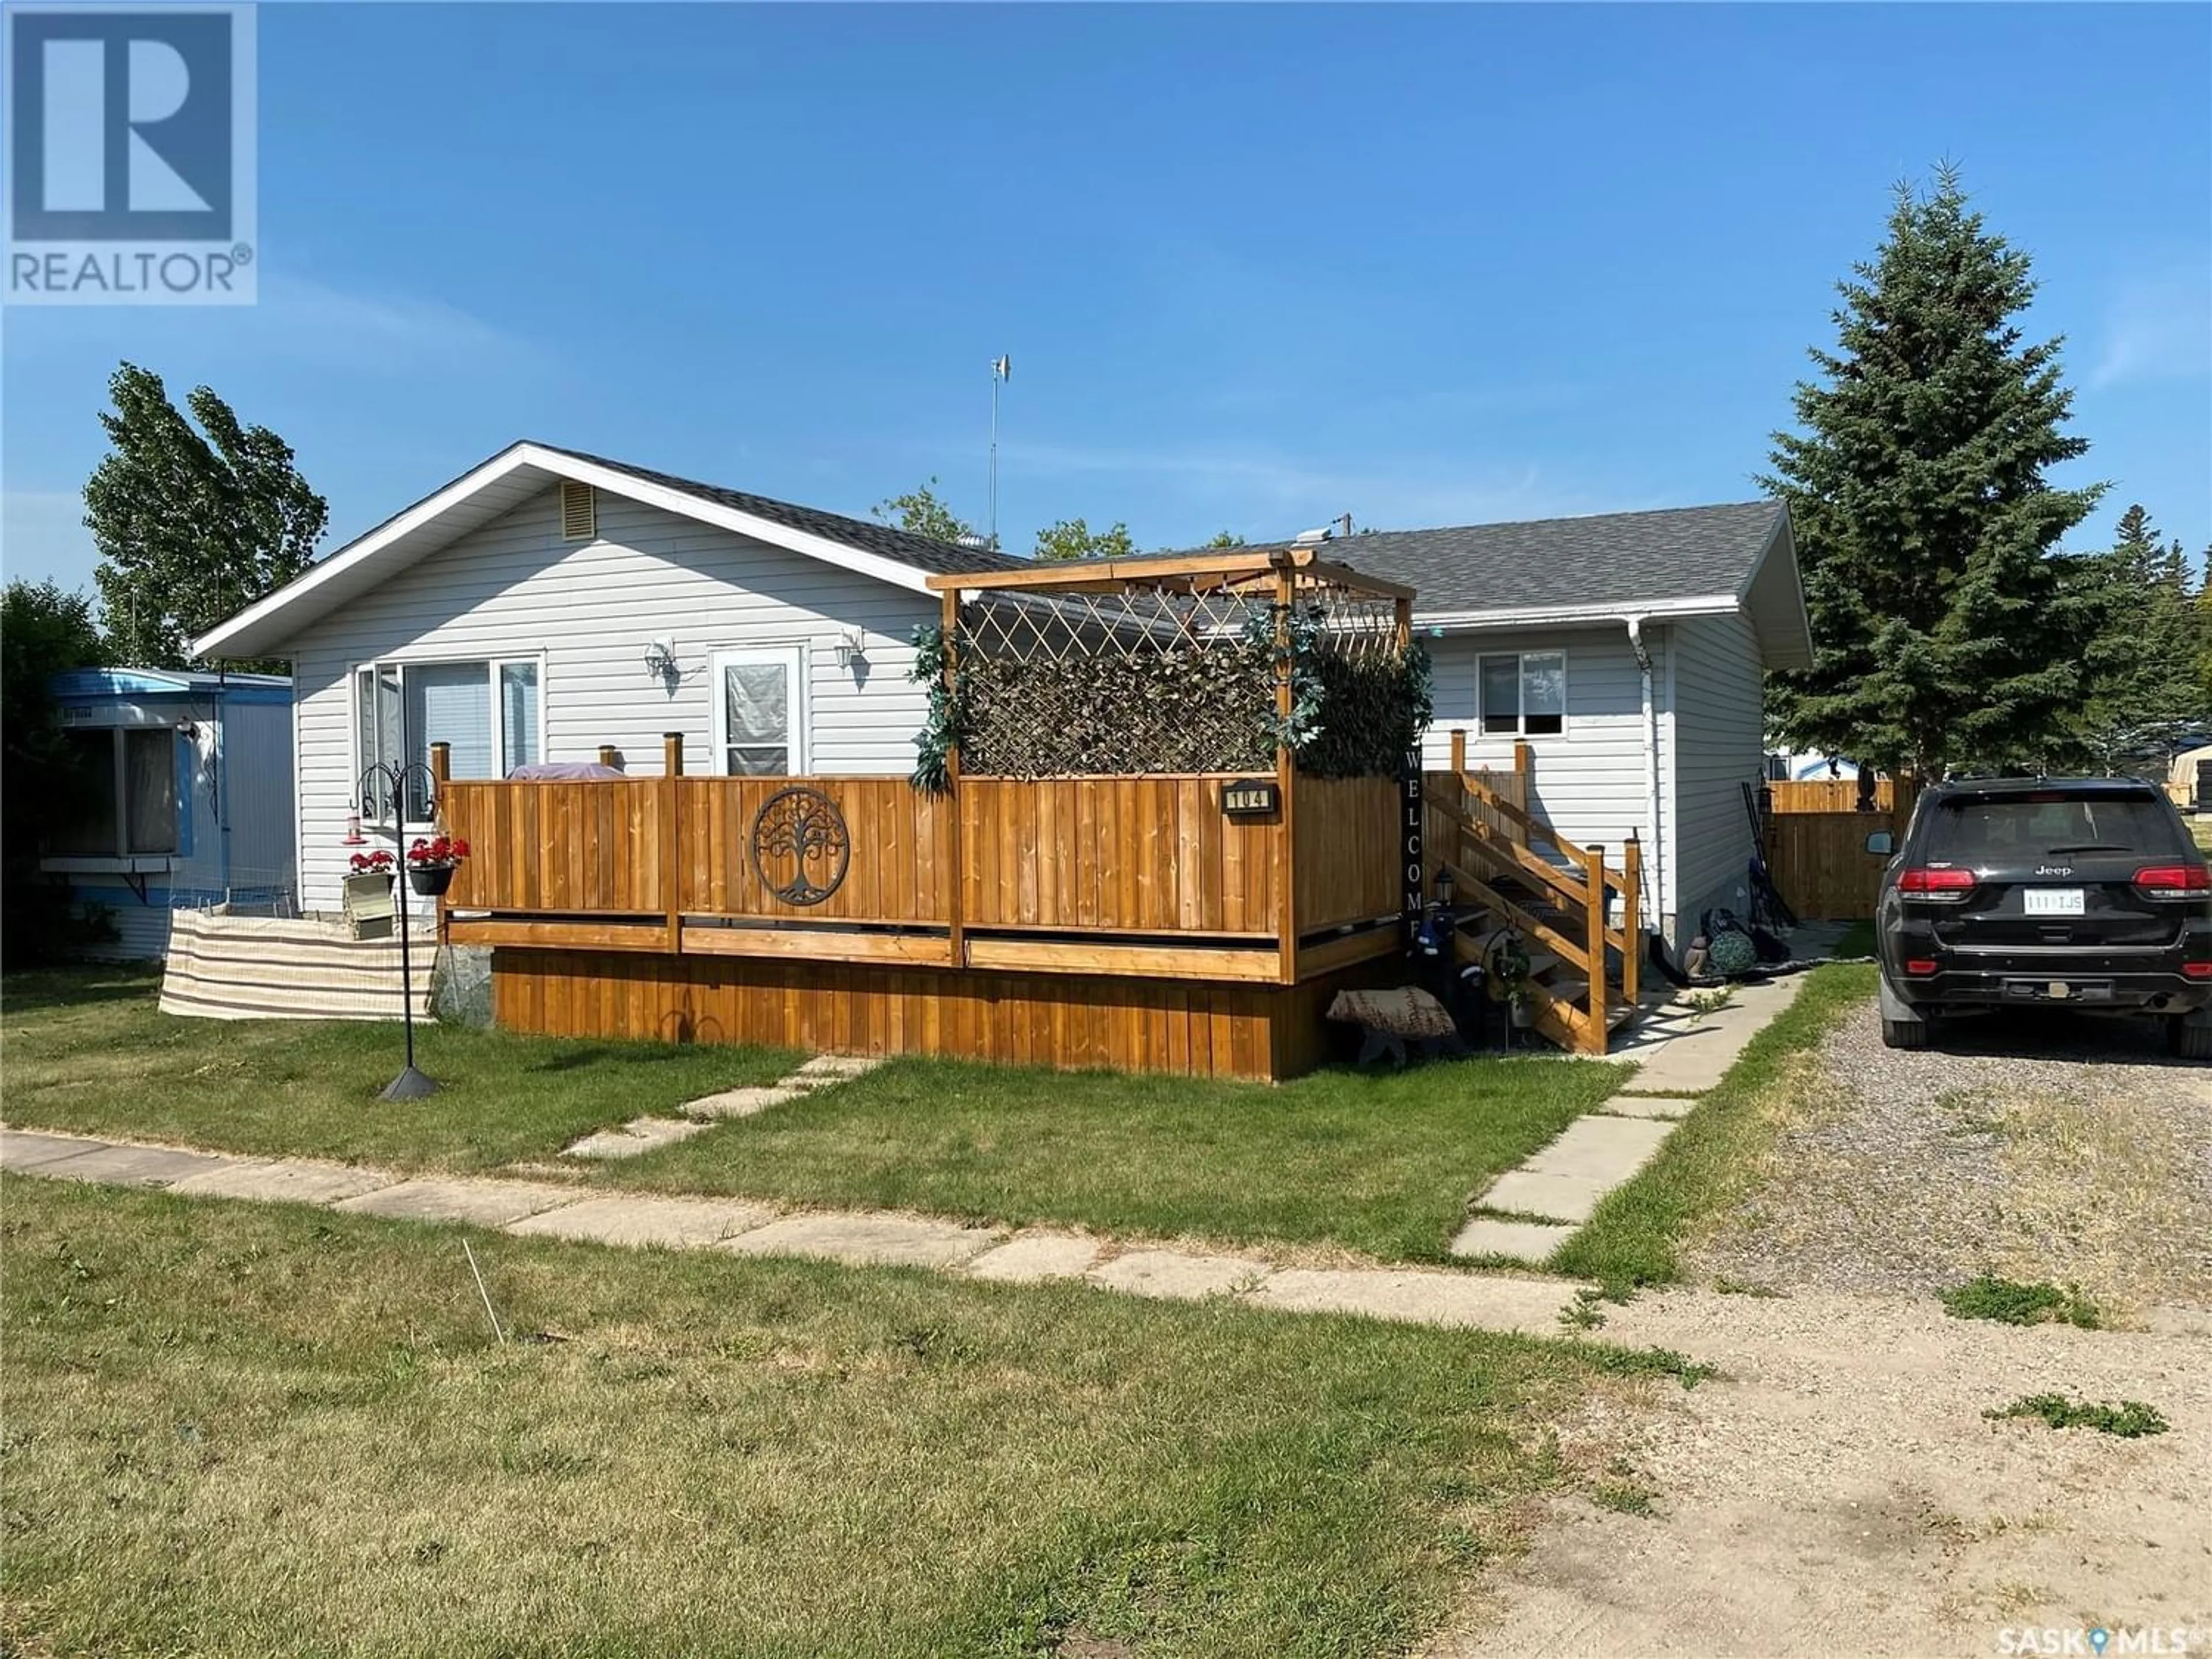 Home with unknown exterior material for 104 1st STREET E, Weirdale Saskatchewan S0J2Z0